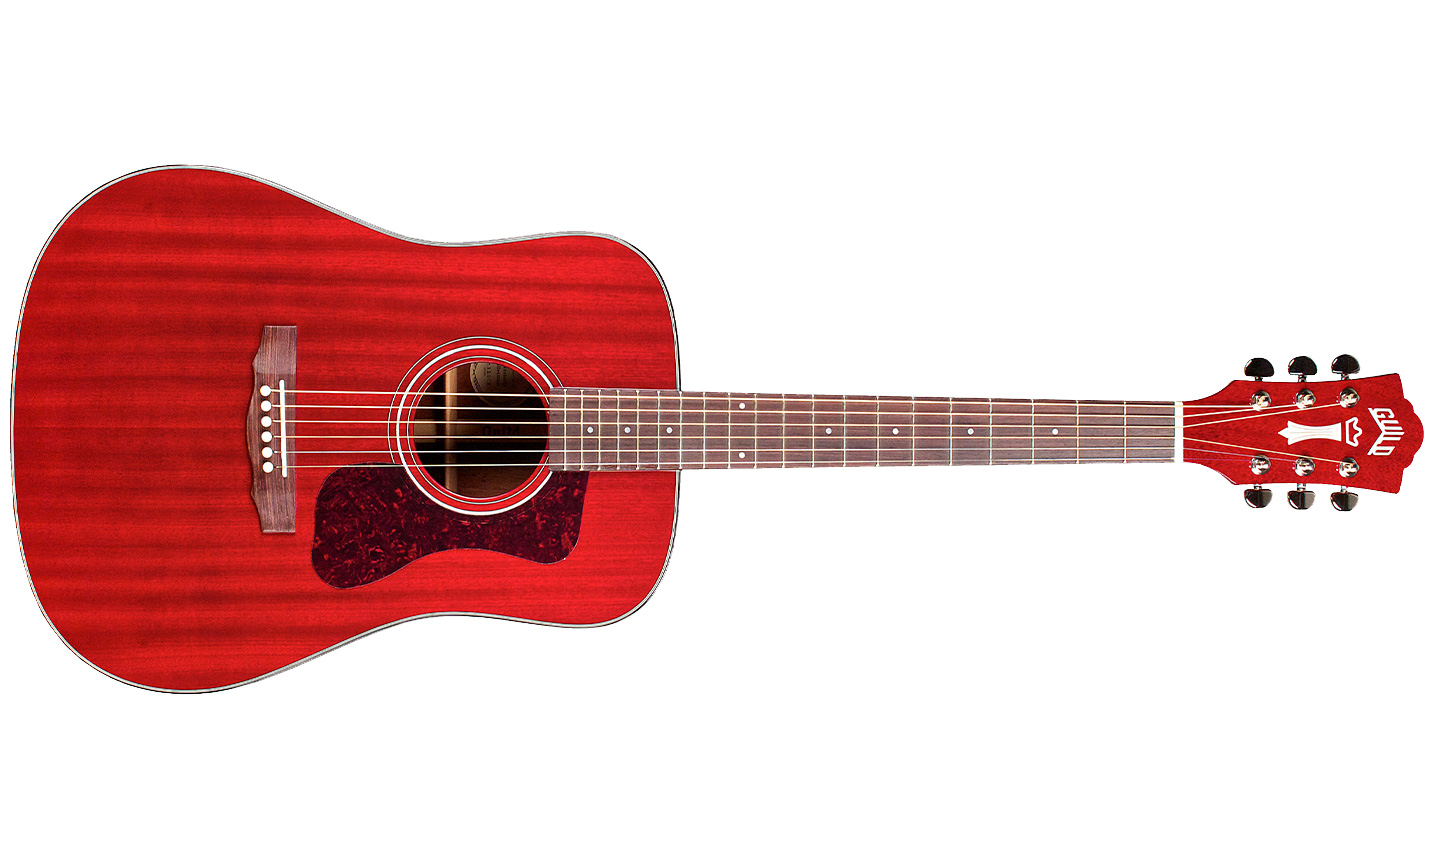 Guild D-120 Westerly Dreadnought Tout Acajou Rw - Cherry Red Gloss - Acoustic guitar & electro - Variation 1